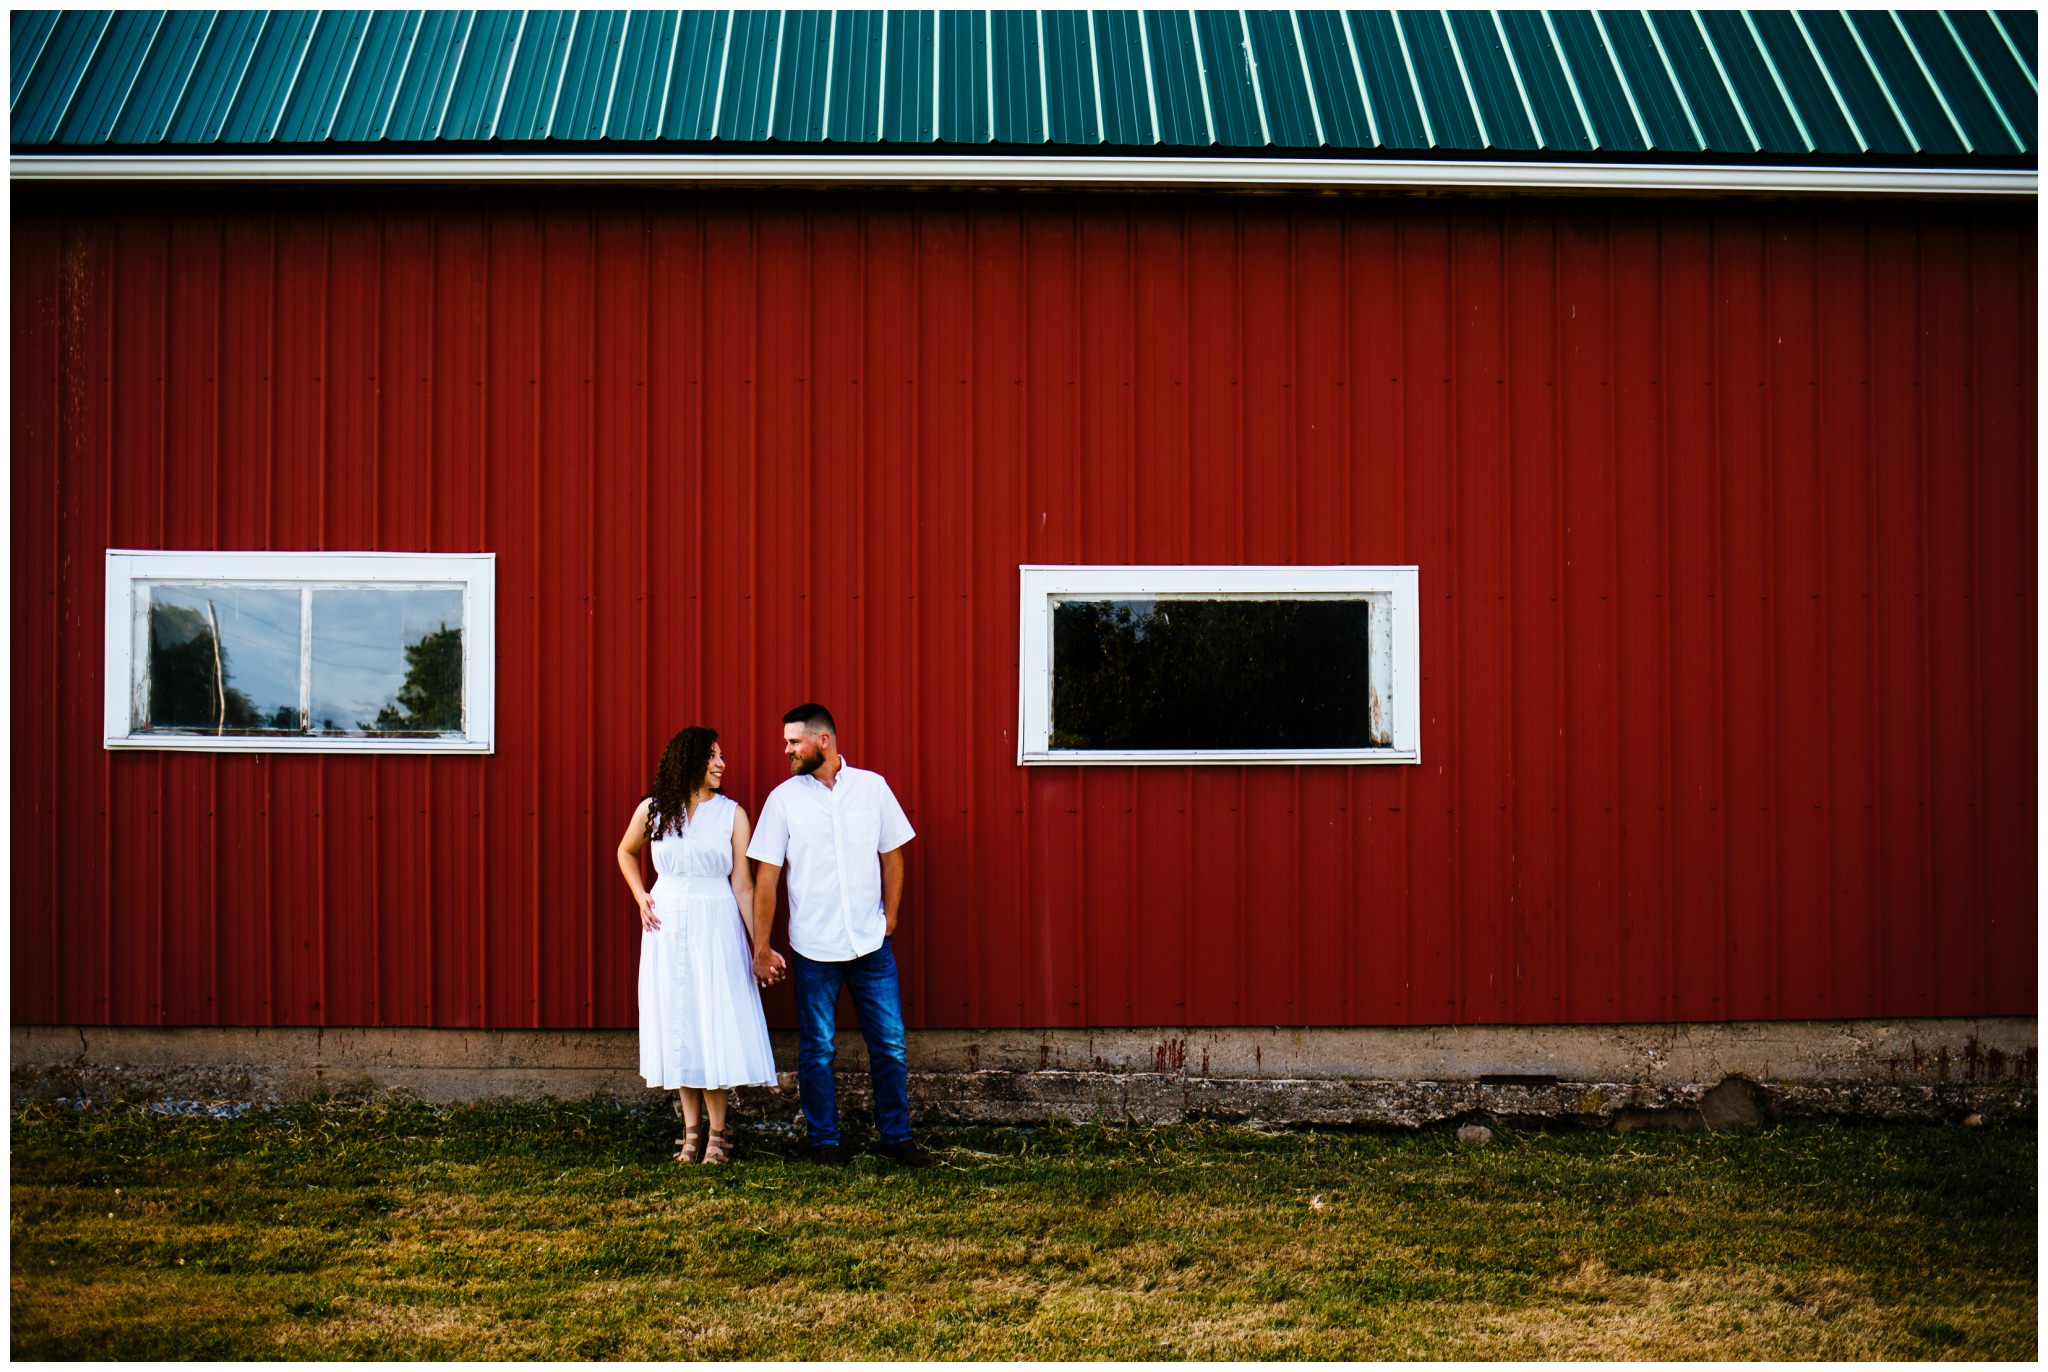 A woman wears a white dress to her farm engagement session. She looks at her fiancé and smiles. They are in front of a red barn.